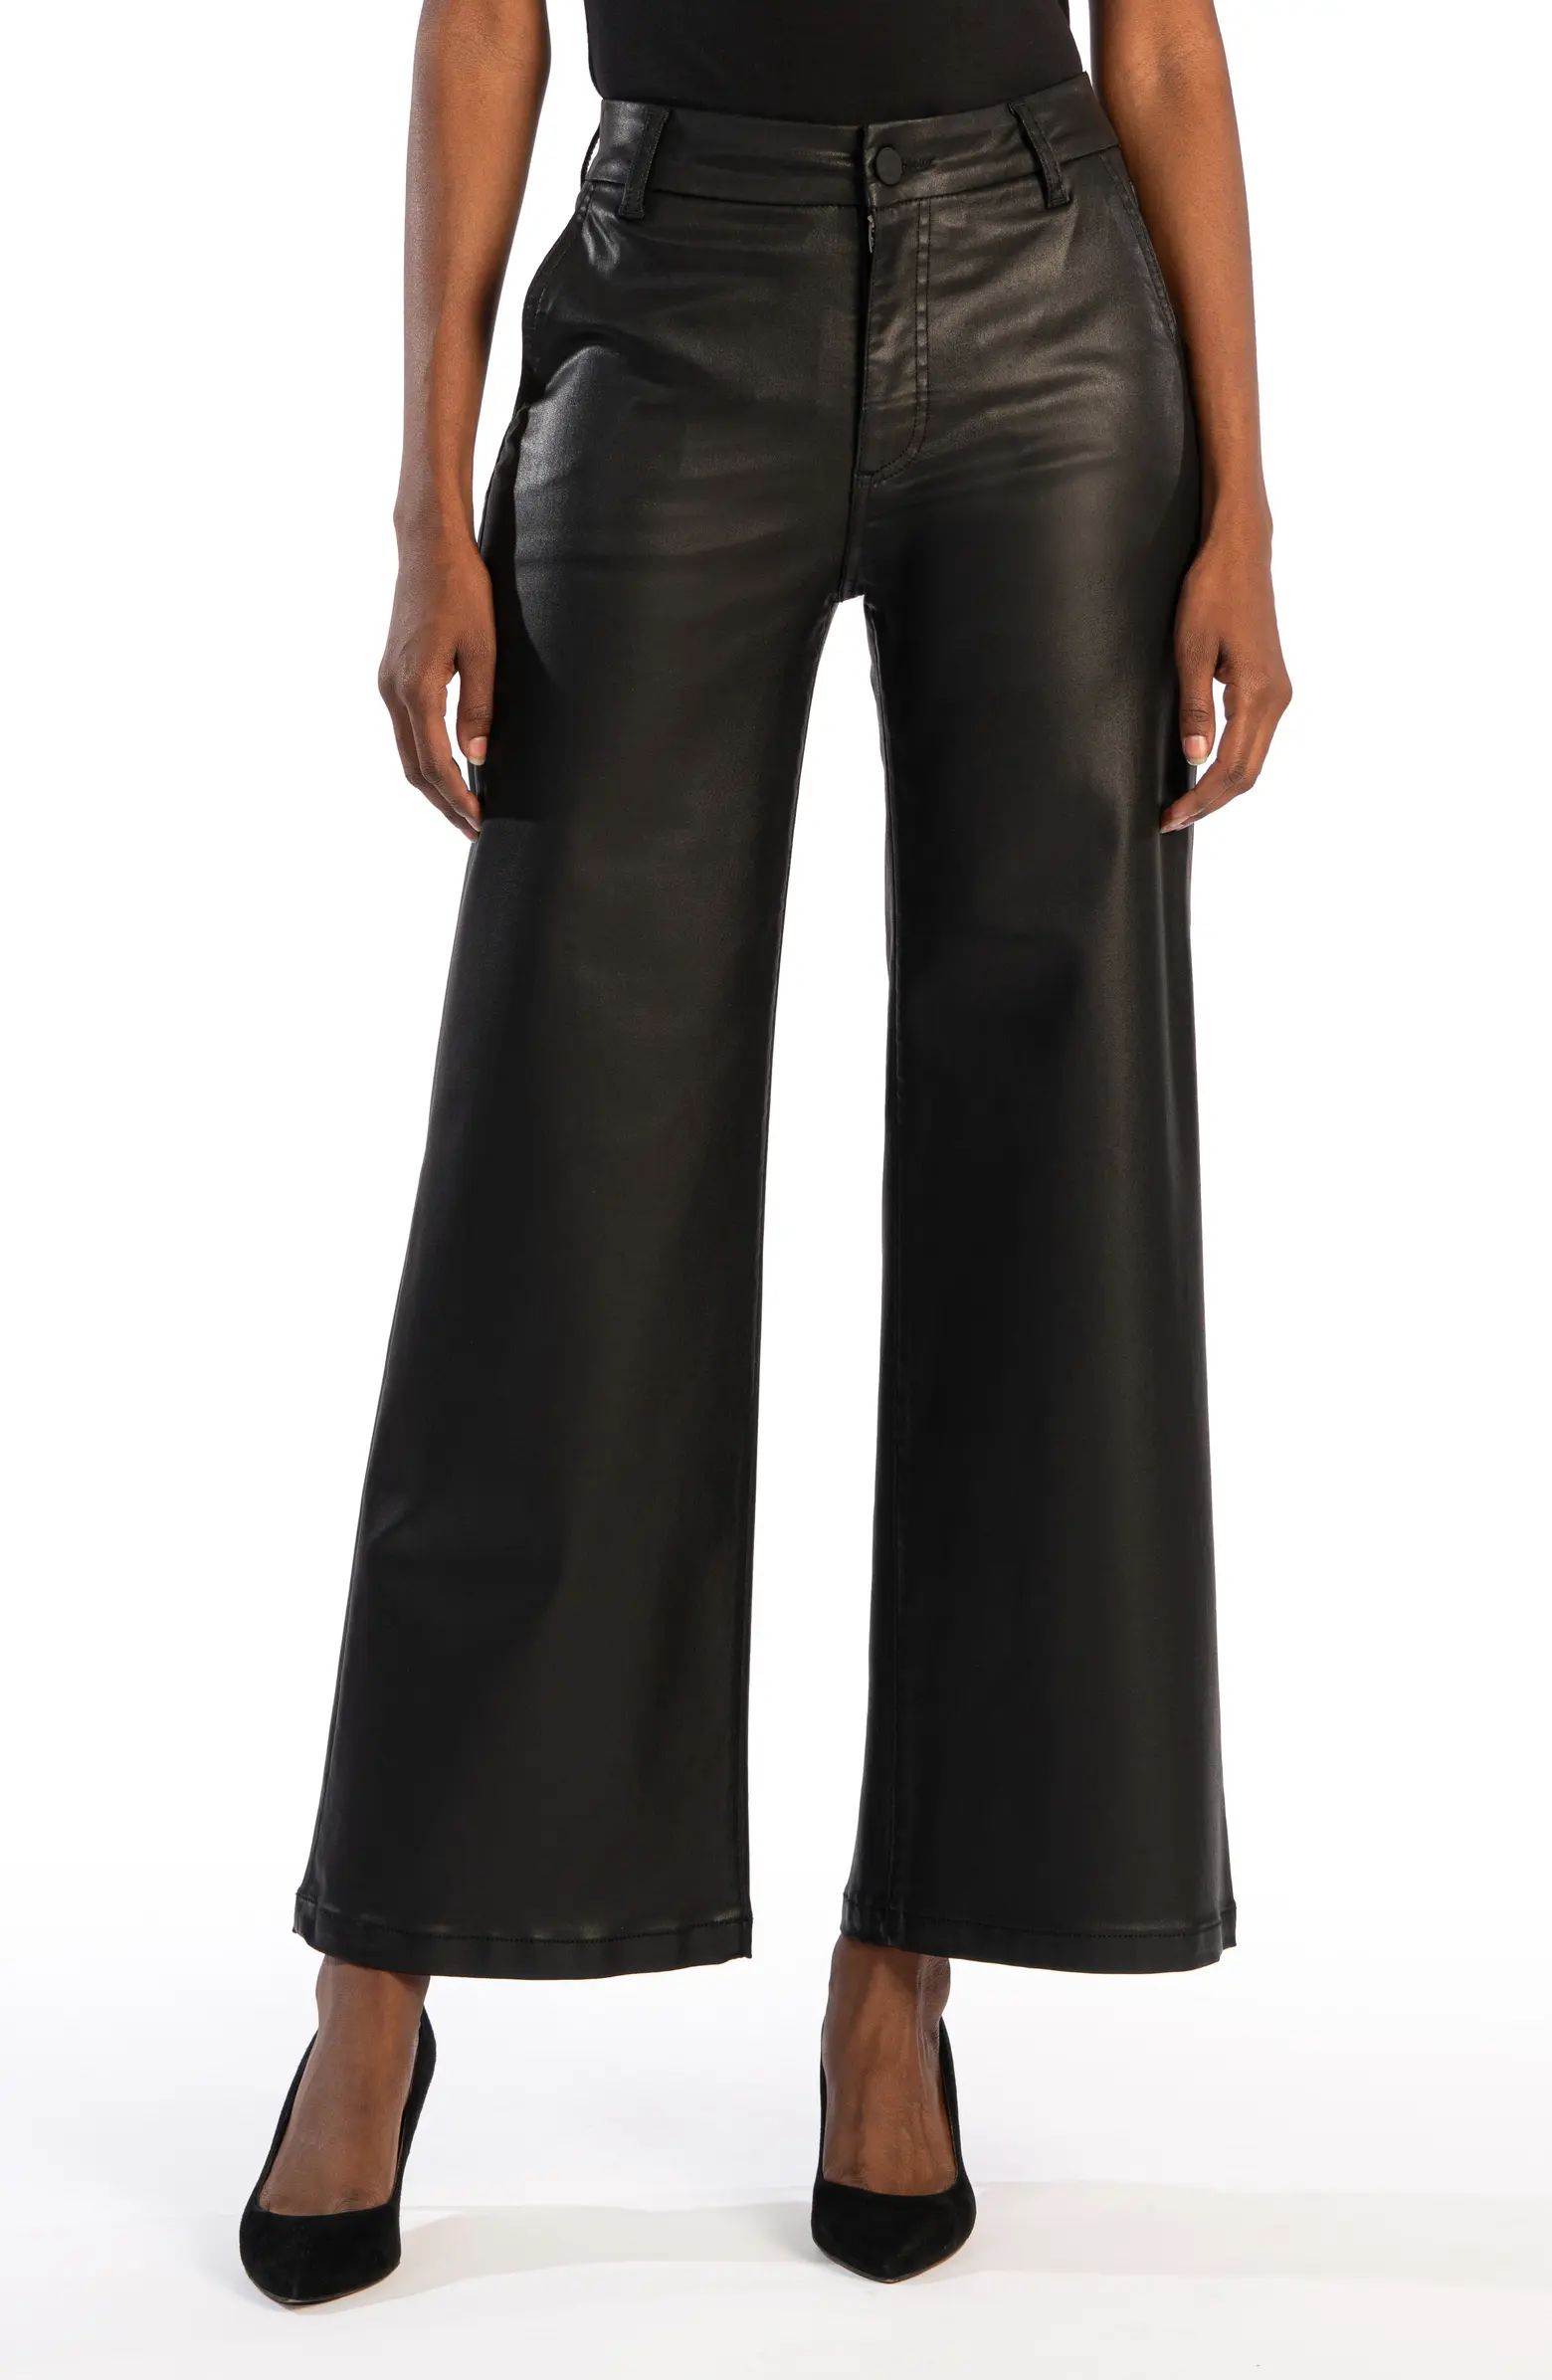 KUT from the Kloth Meg High Waist Coated Wide Leg Jeans | Nordstrom | Nordstrom